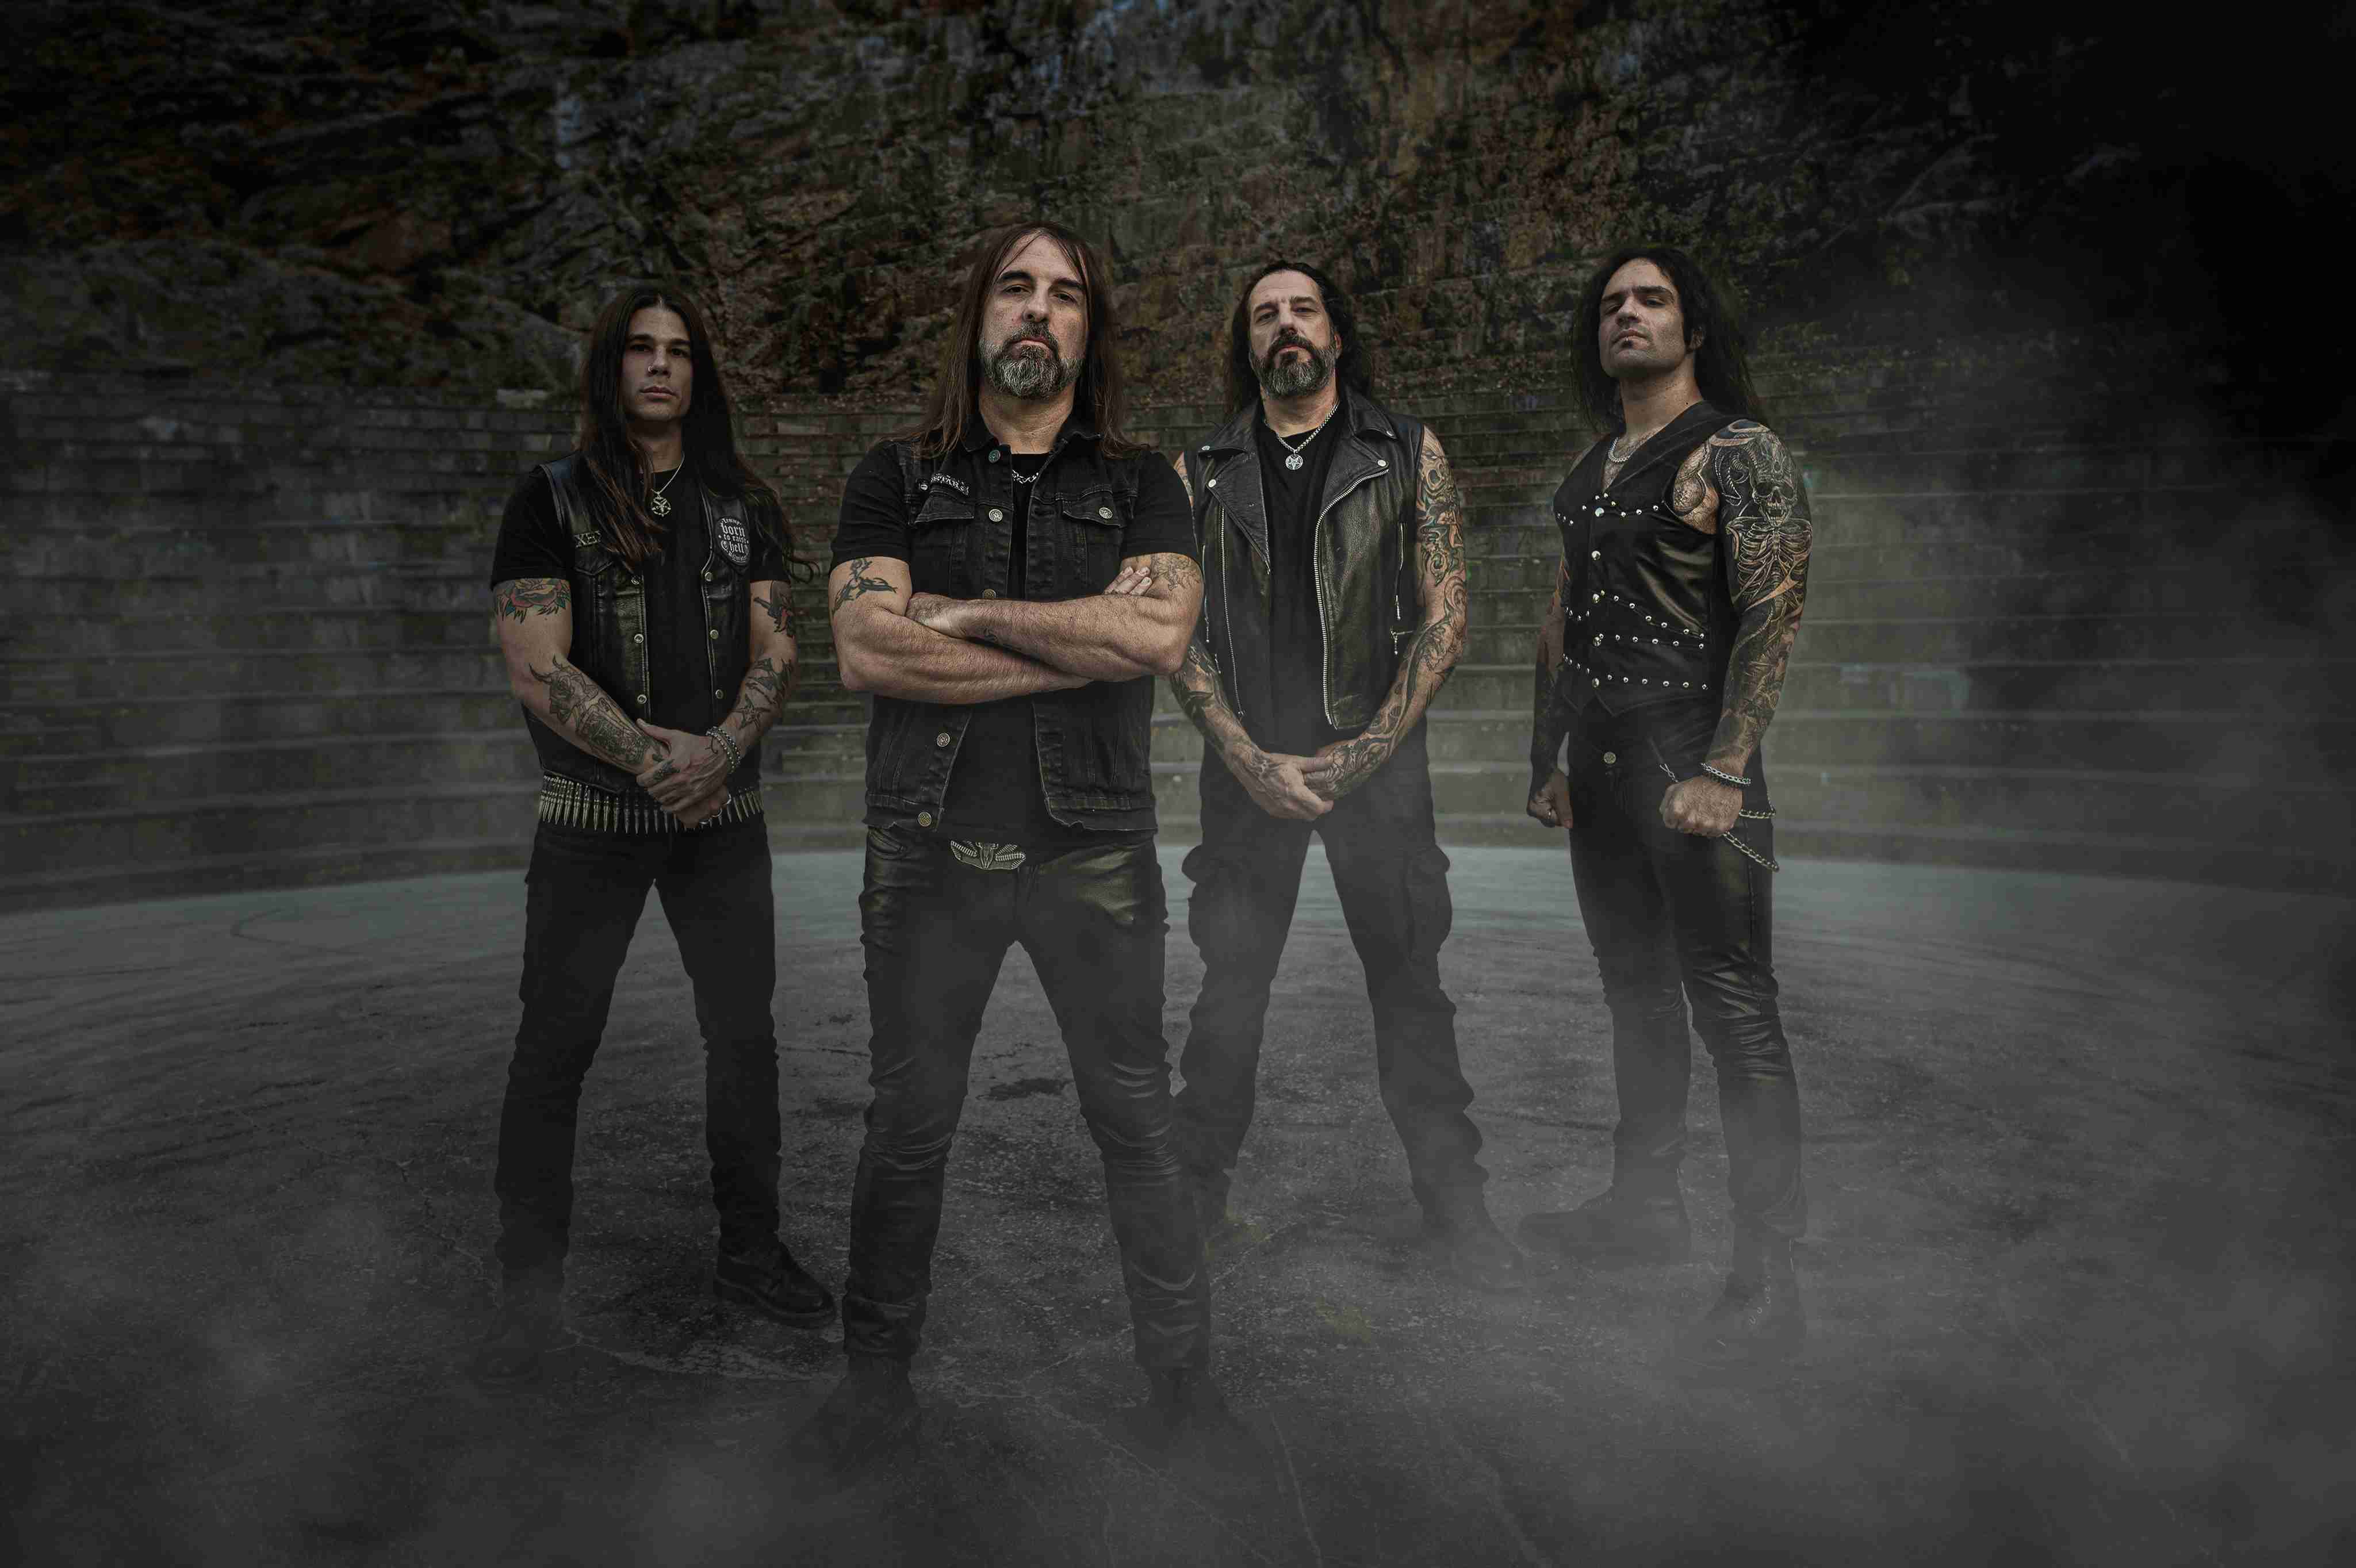 ROTTING CHRIST: Titelstory & exklusive CD-Beilage in nächster Legacy-Ausgabe